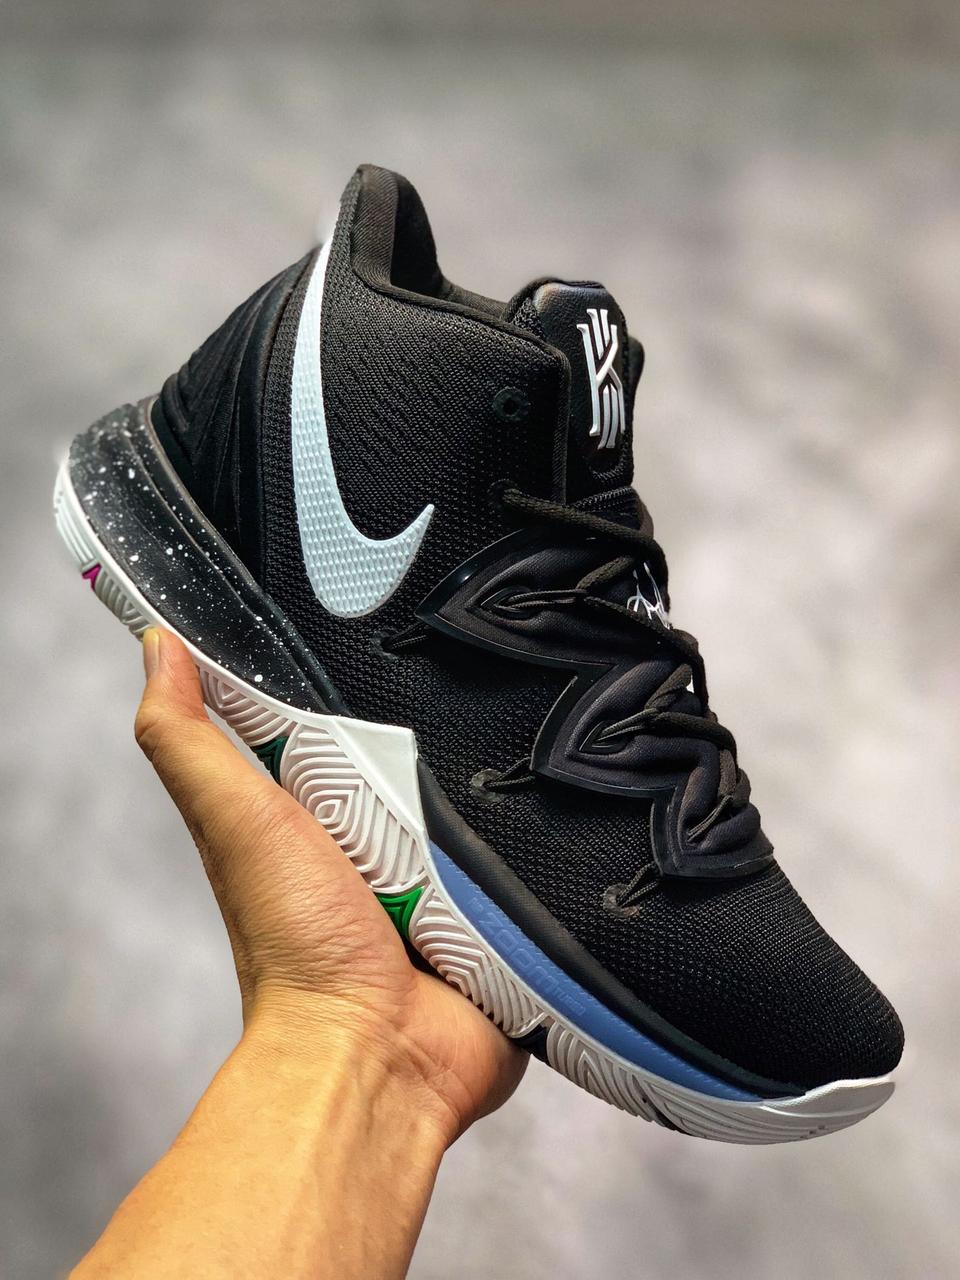 KYRIE 5 or the HARDEN VOL 3 ??? YouTube